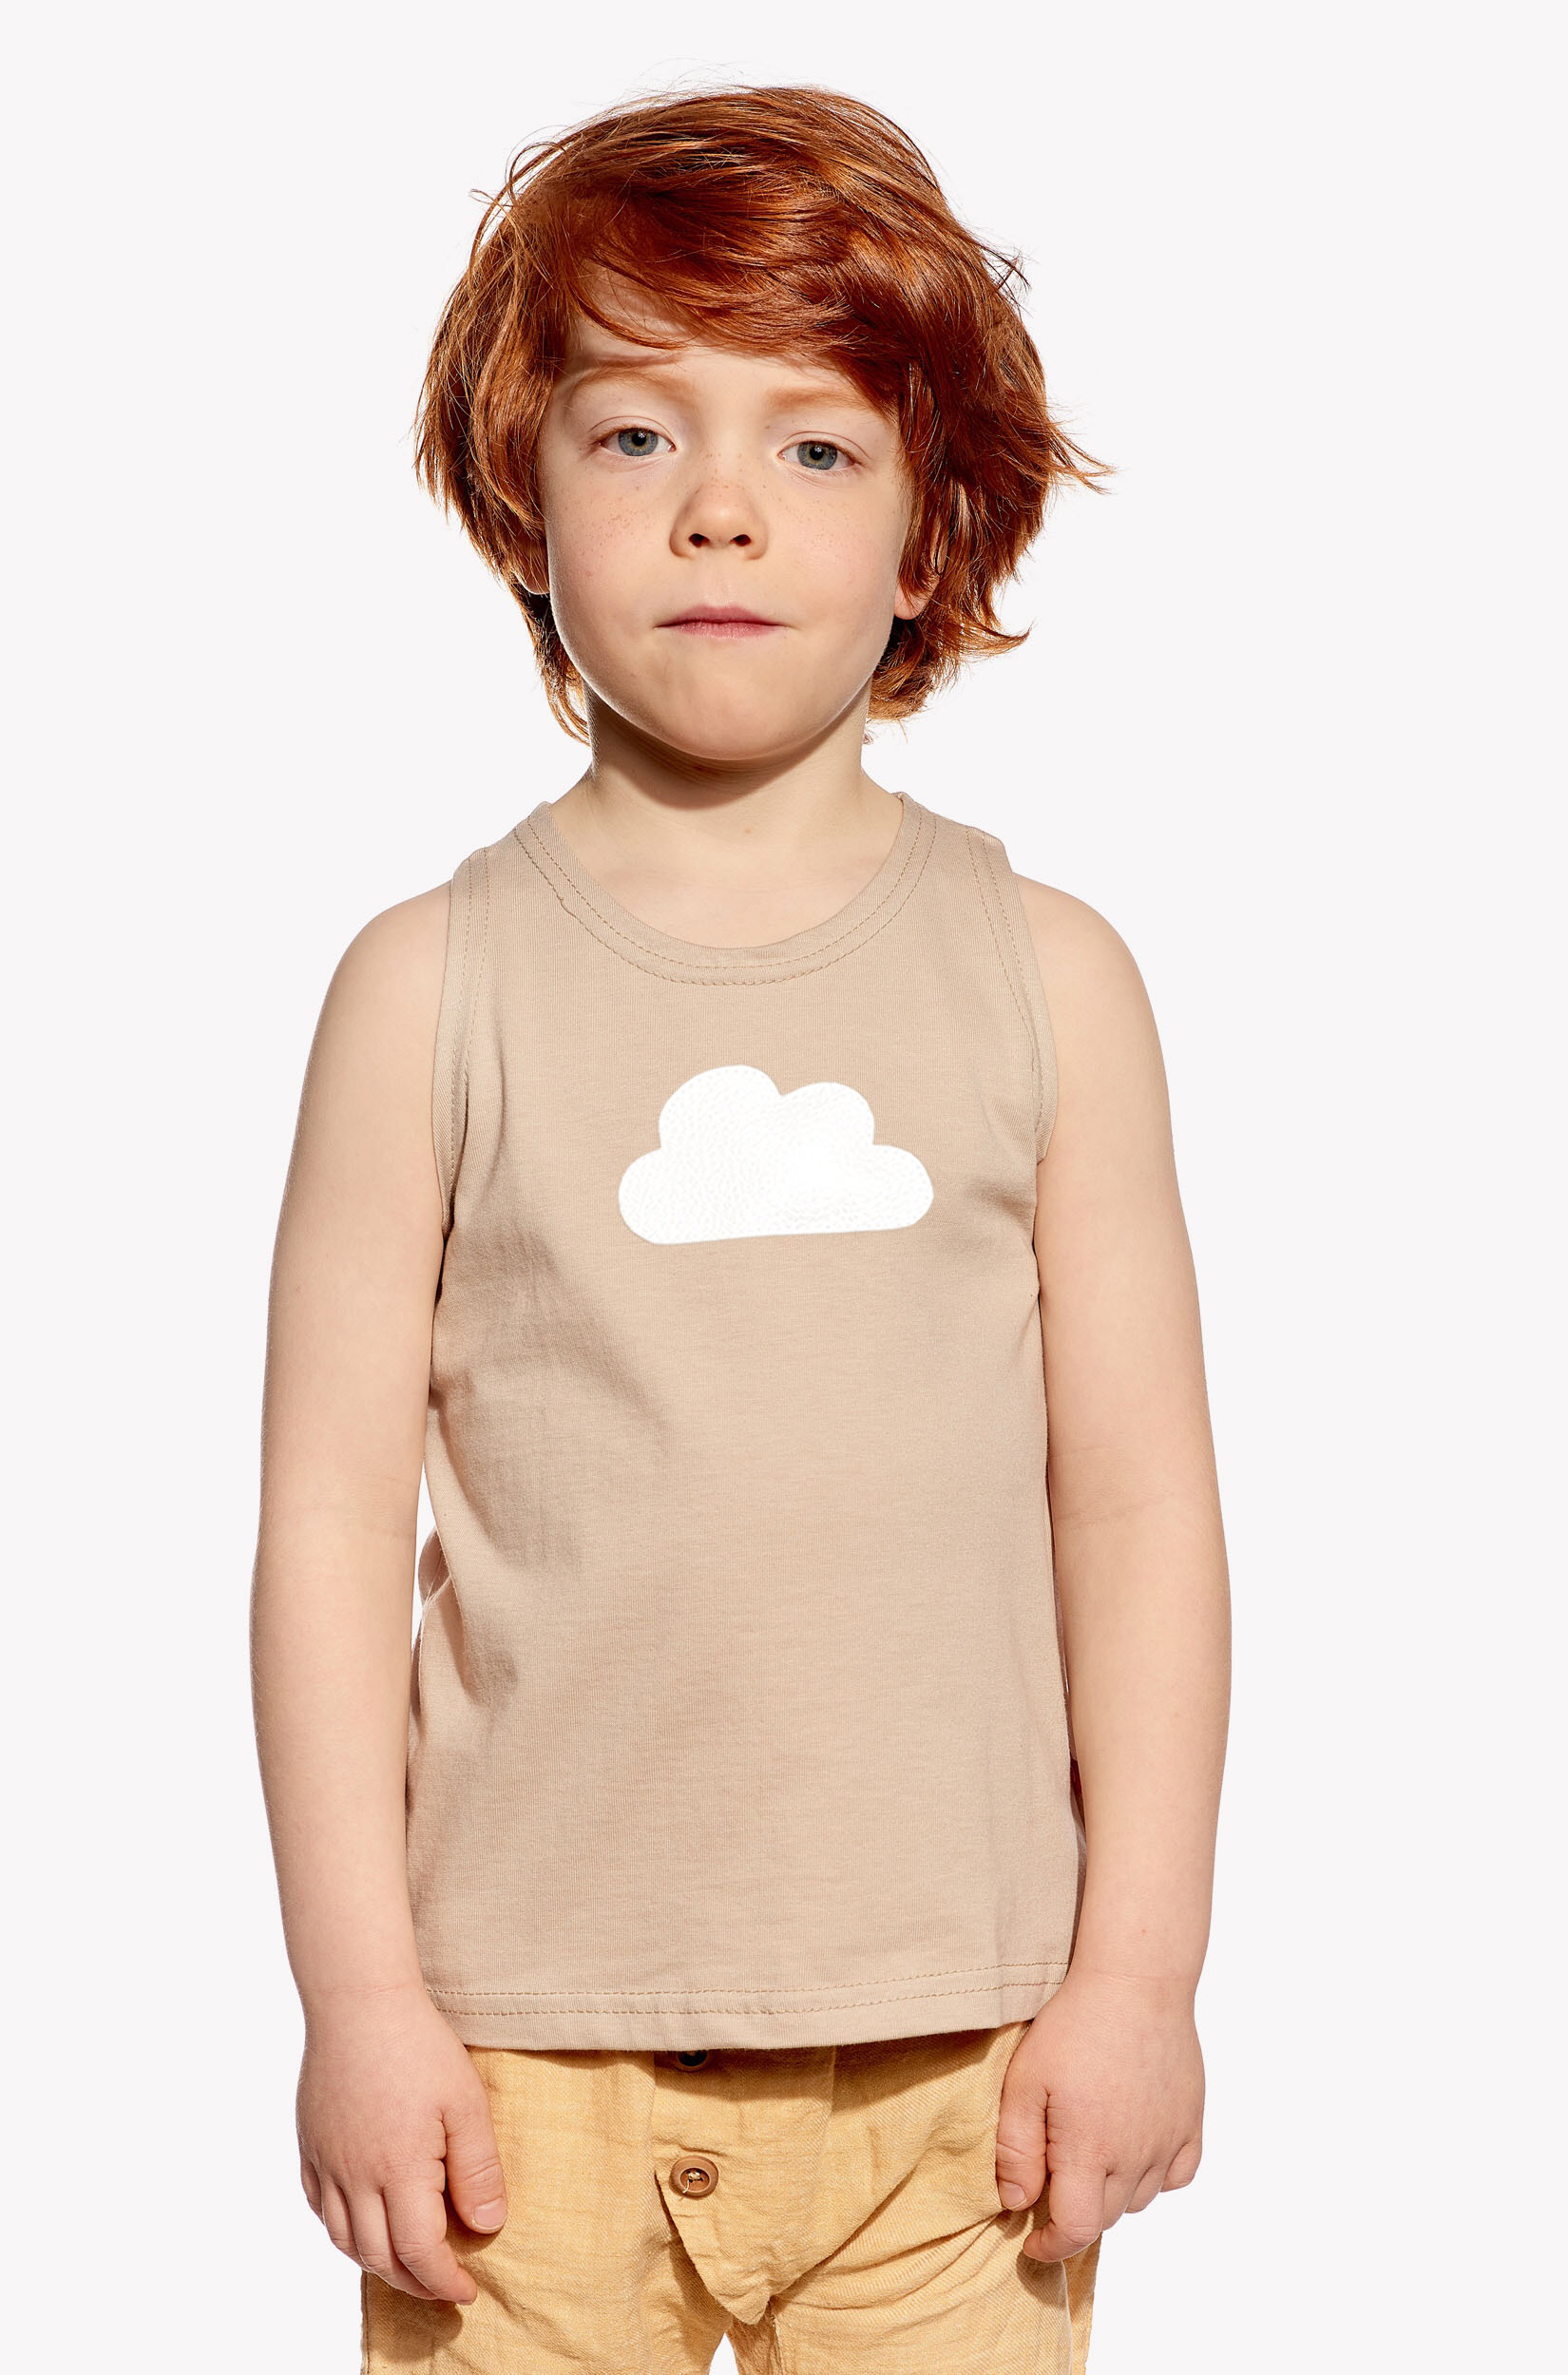 Singlet with cloud